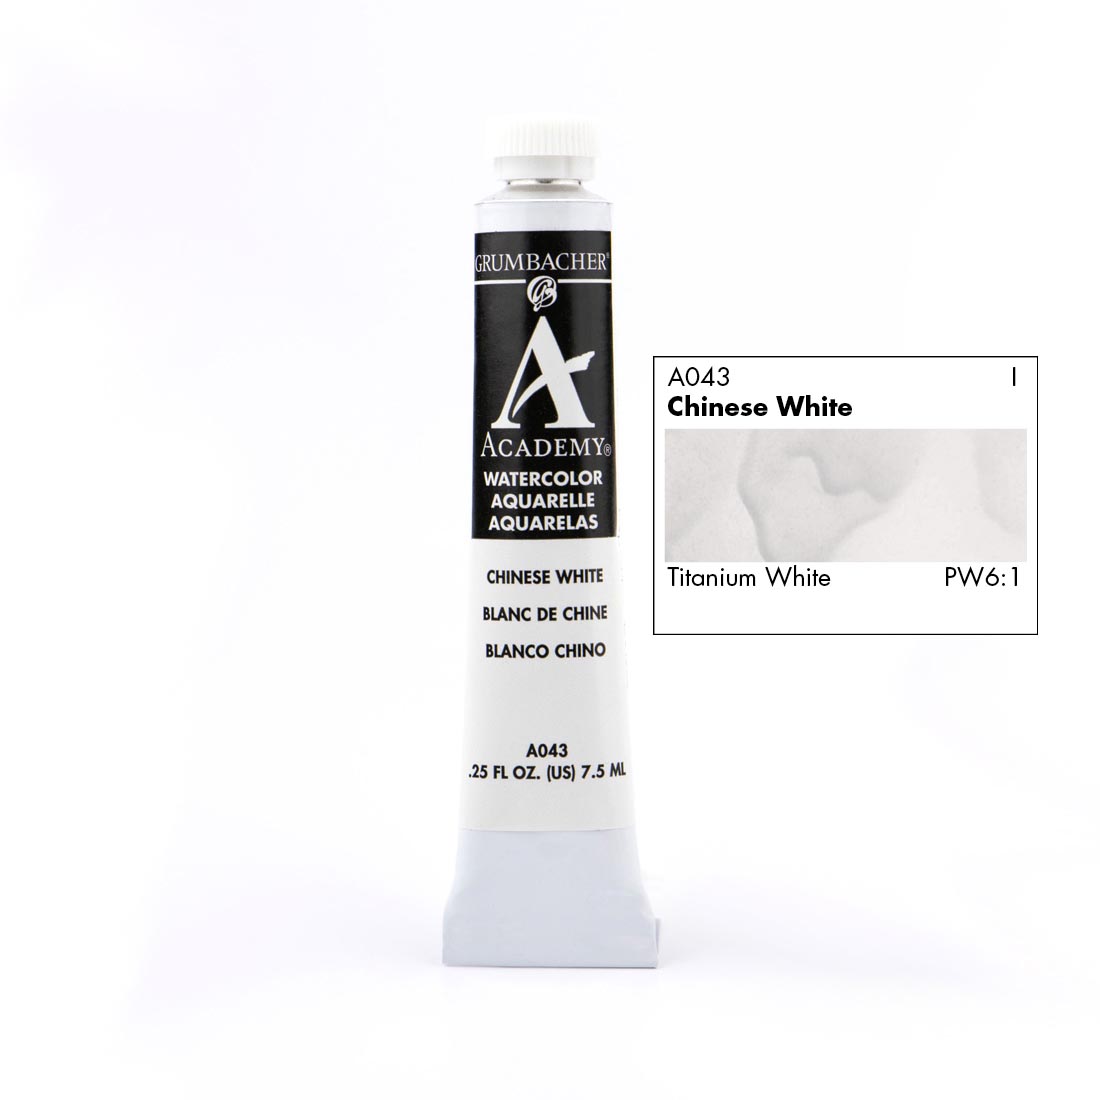 Tube of Grumbacher Academy Watercolor beside Chinese White color swatch